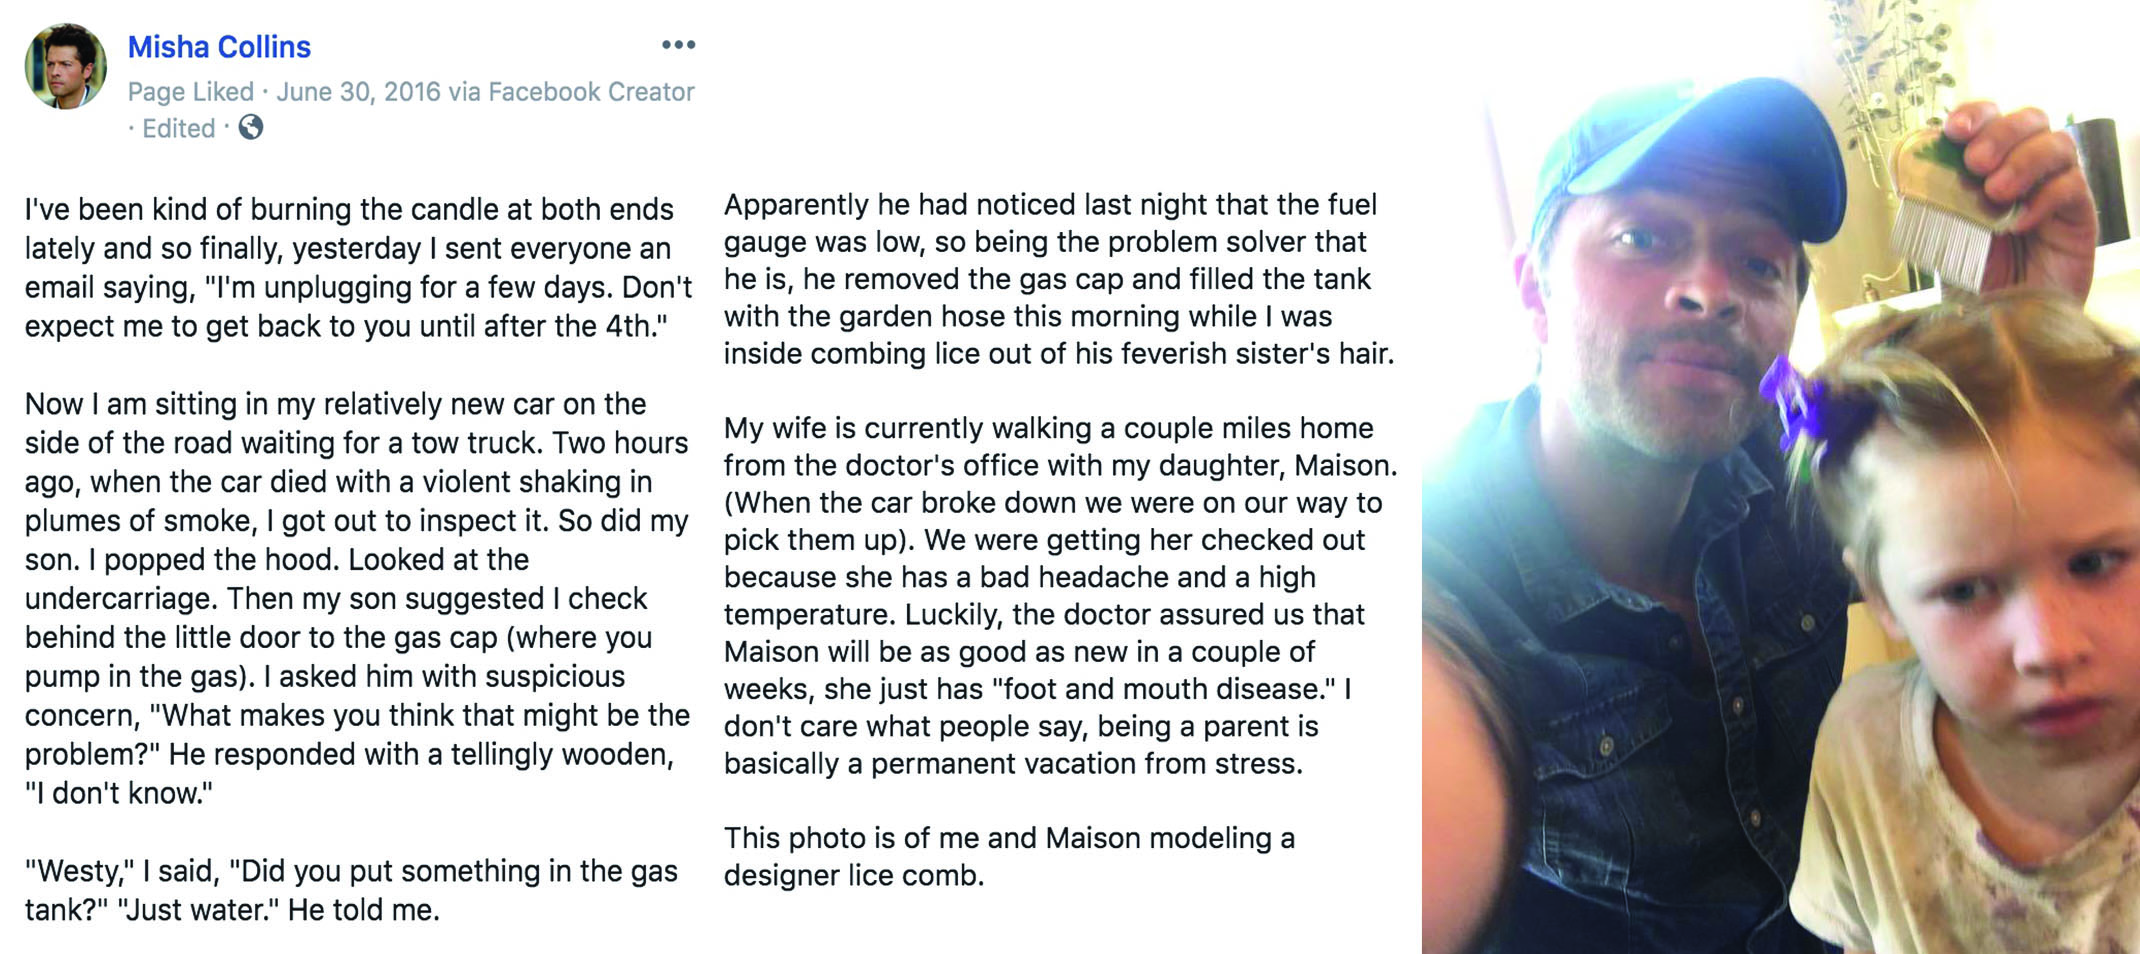 Color screenshot of Misha Collins Facebook image post from account officialmisha dated June 30, 2016, detailing a color photo of Misha Collins and daughter Maison with a comb.